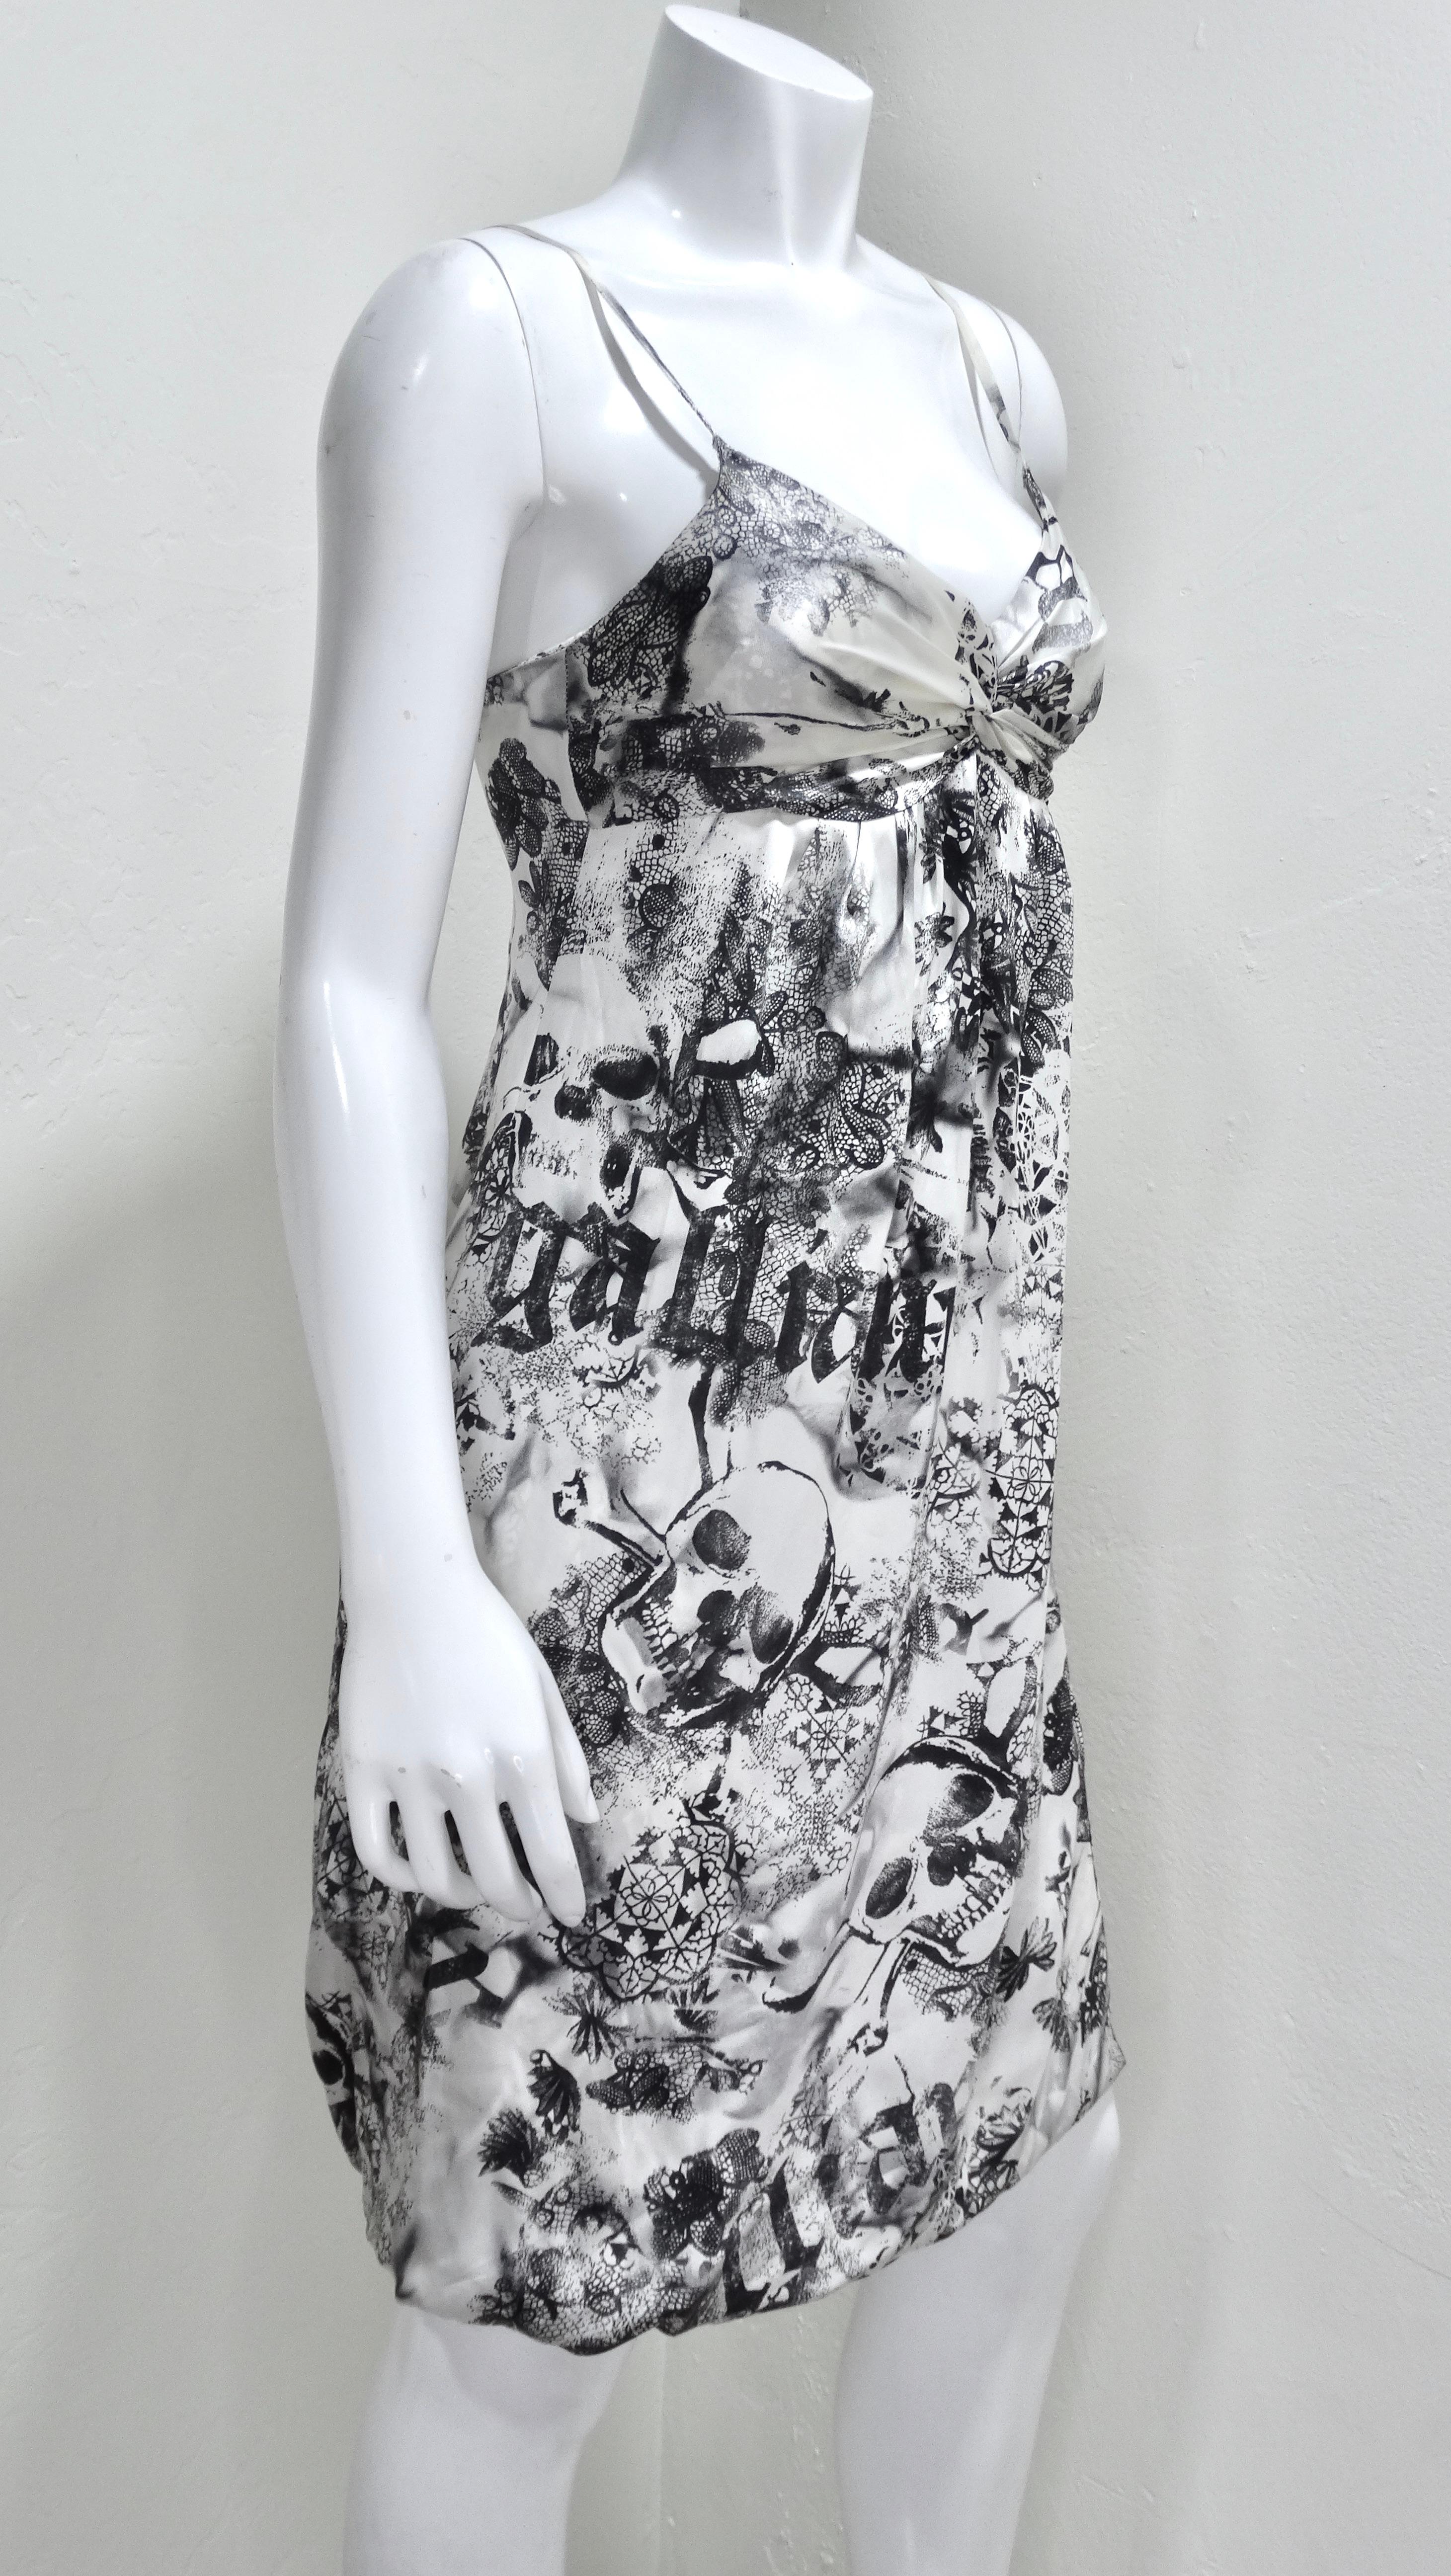 Bring out your rocker-chick for this Galliano era printed knee-length dress. This is a slip-style dress, double lined, with a flattering twisted bust, thin straps, and a 'Galliano' and skull black and white print throughout. Pair with some Celine